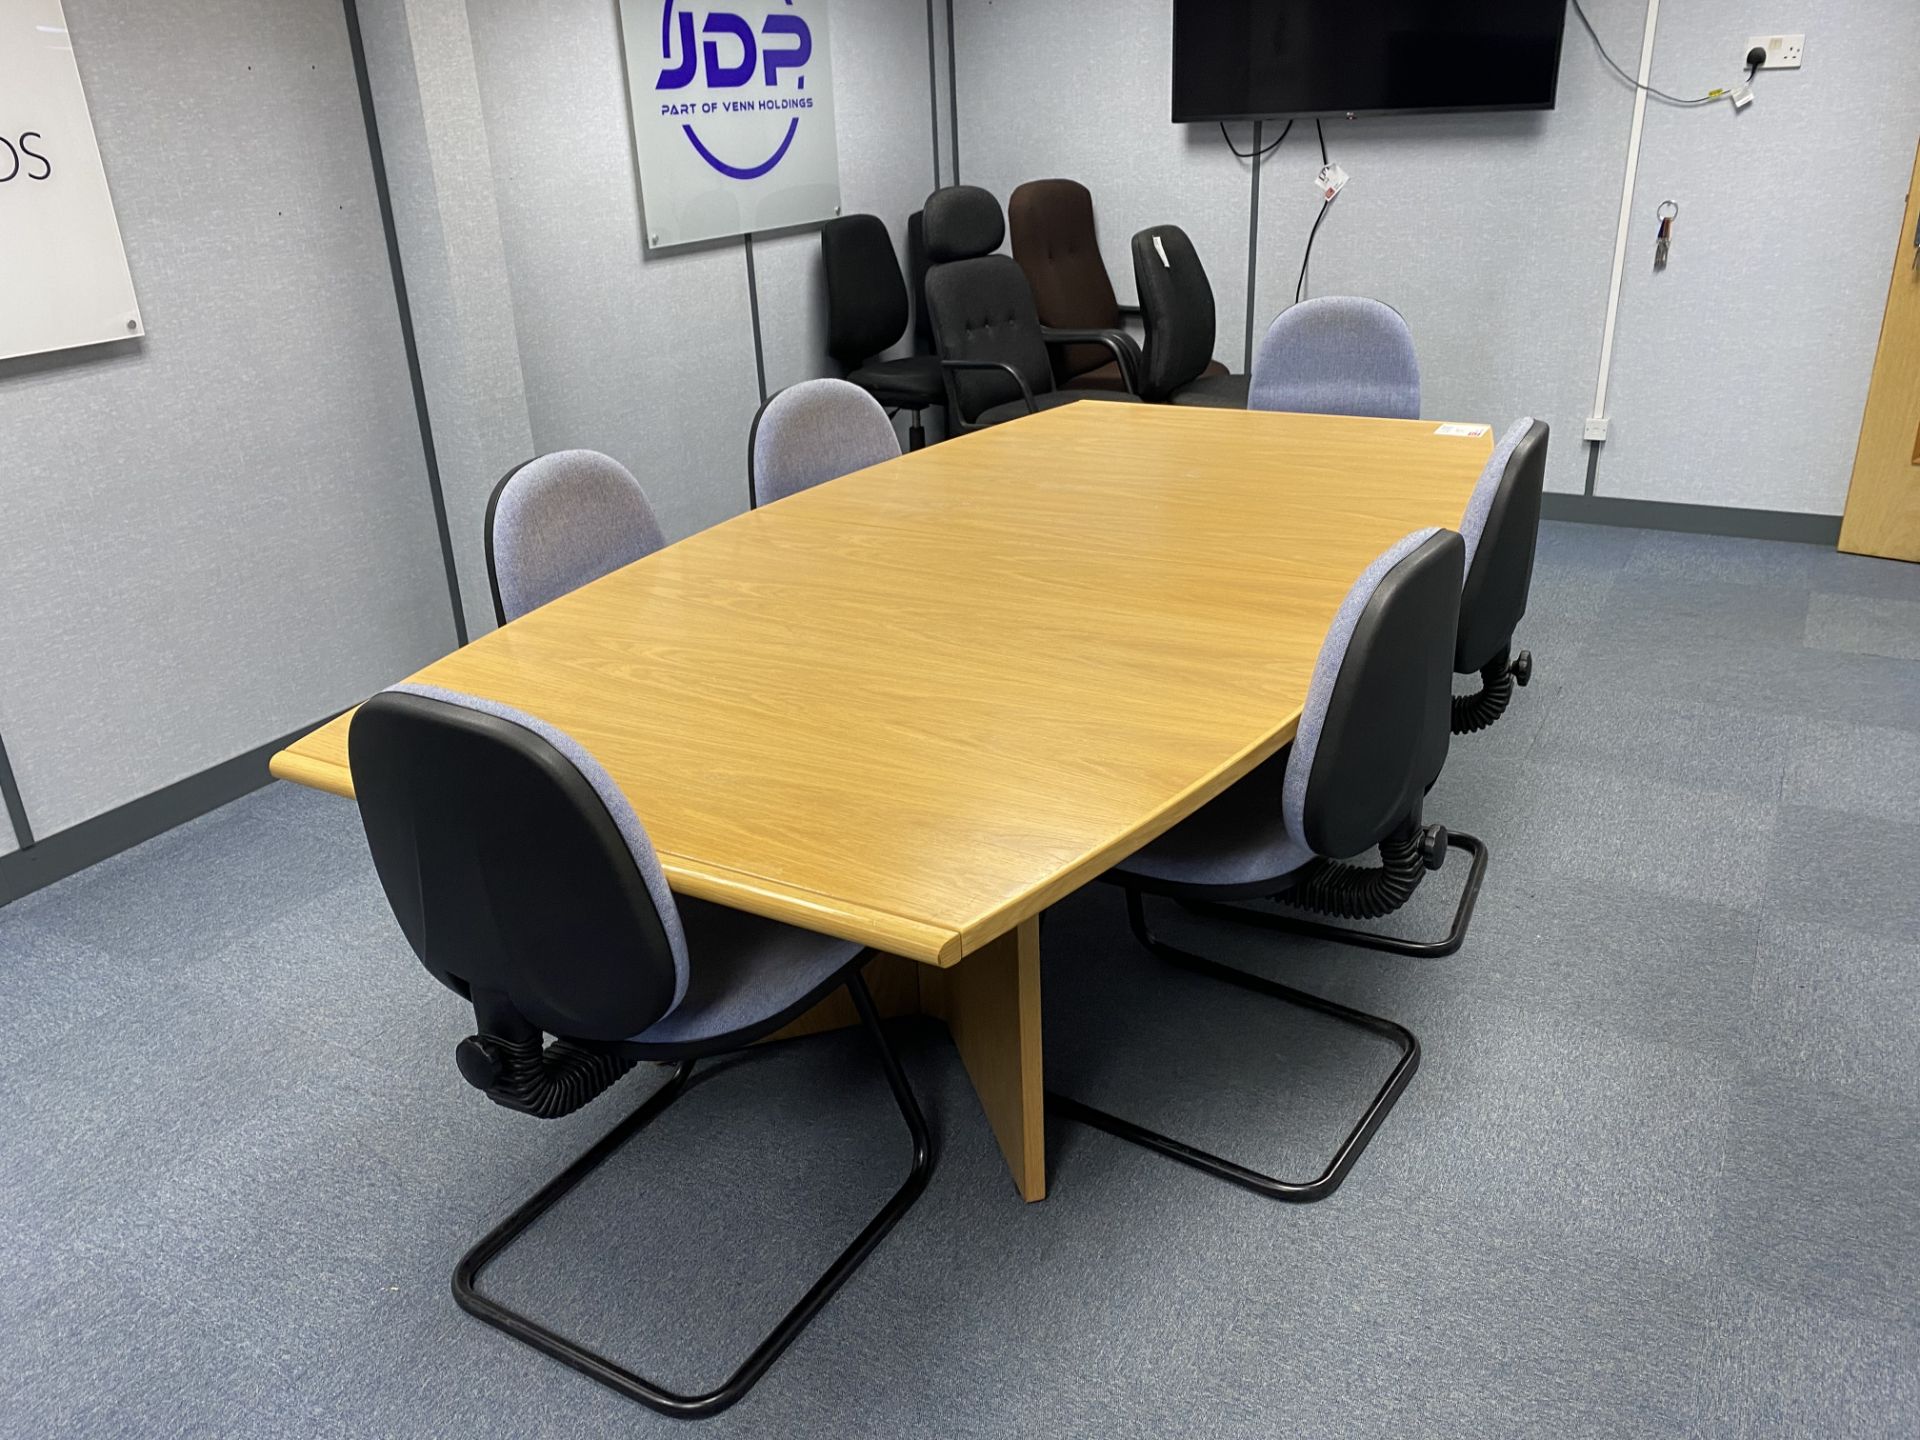 Light wood effect meeting room table (2400mm x 1800mm) - Image 2 of 3